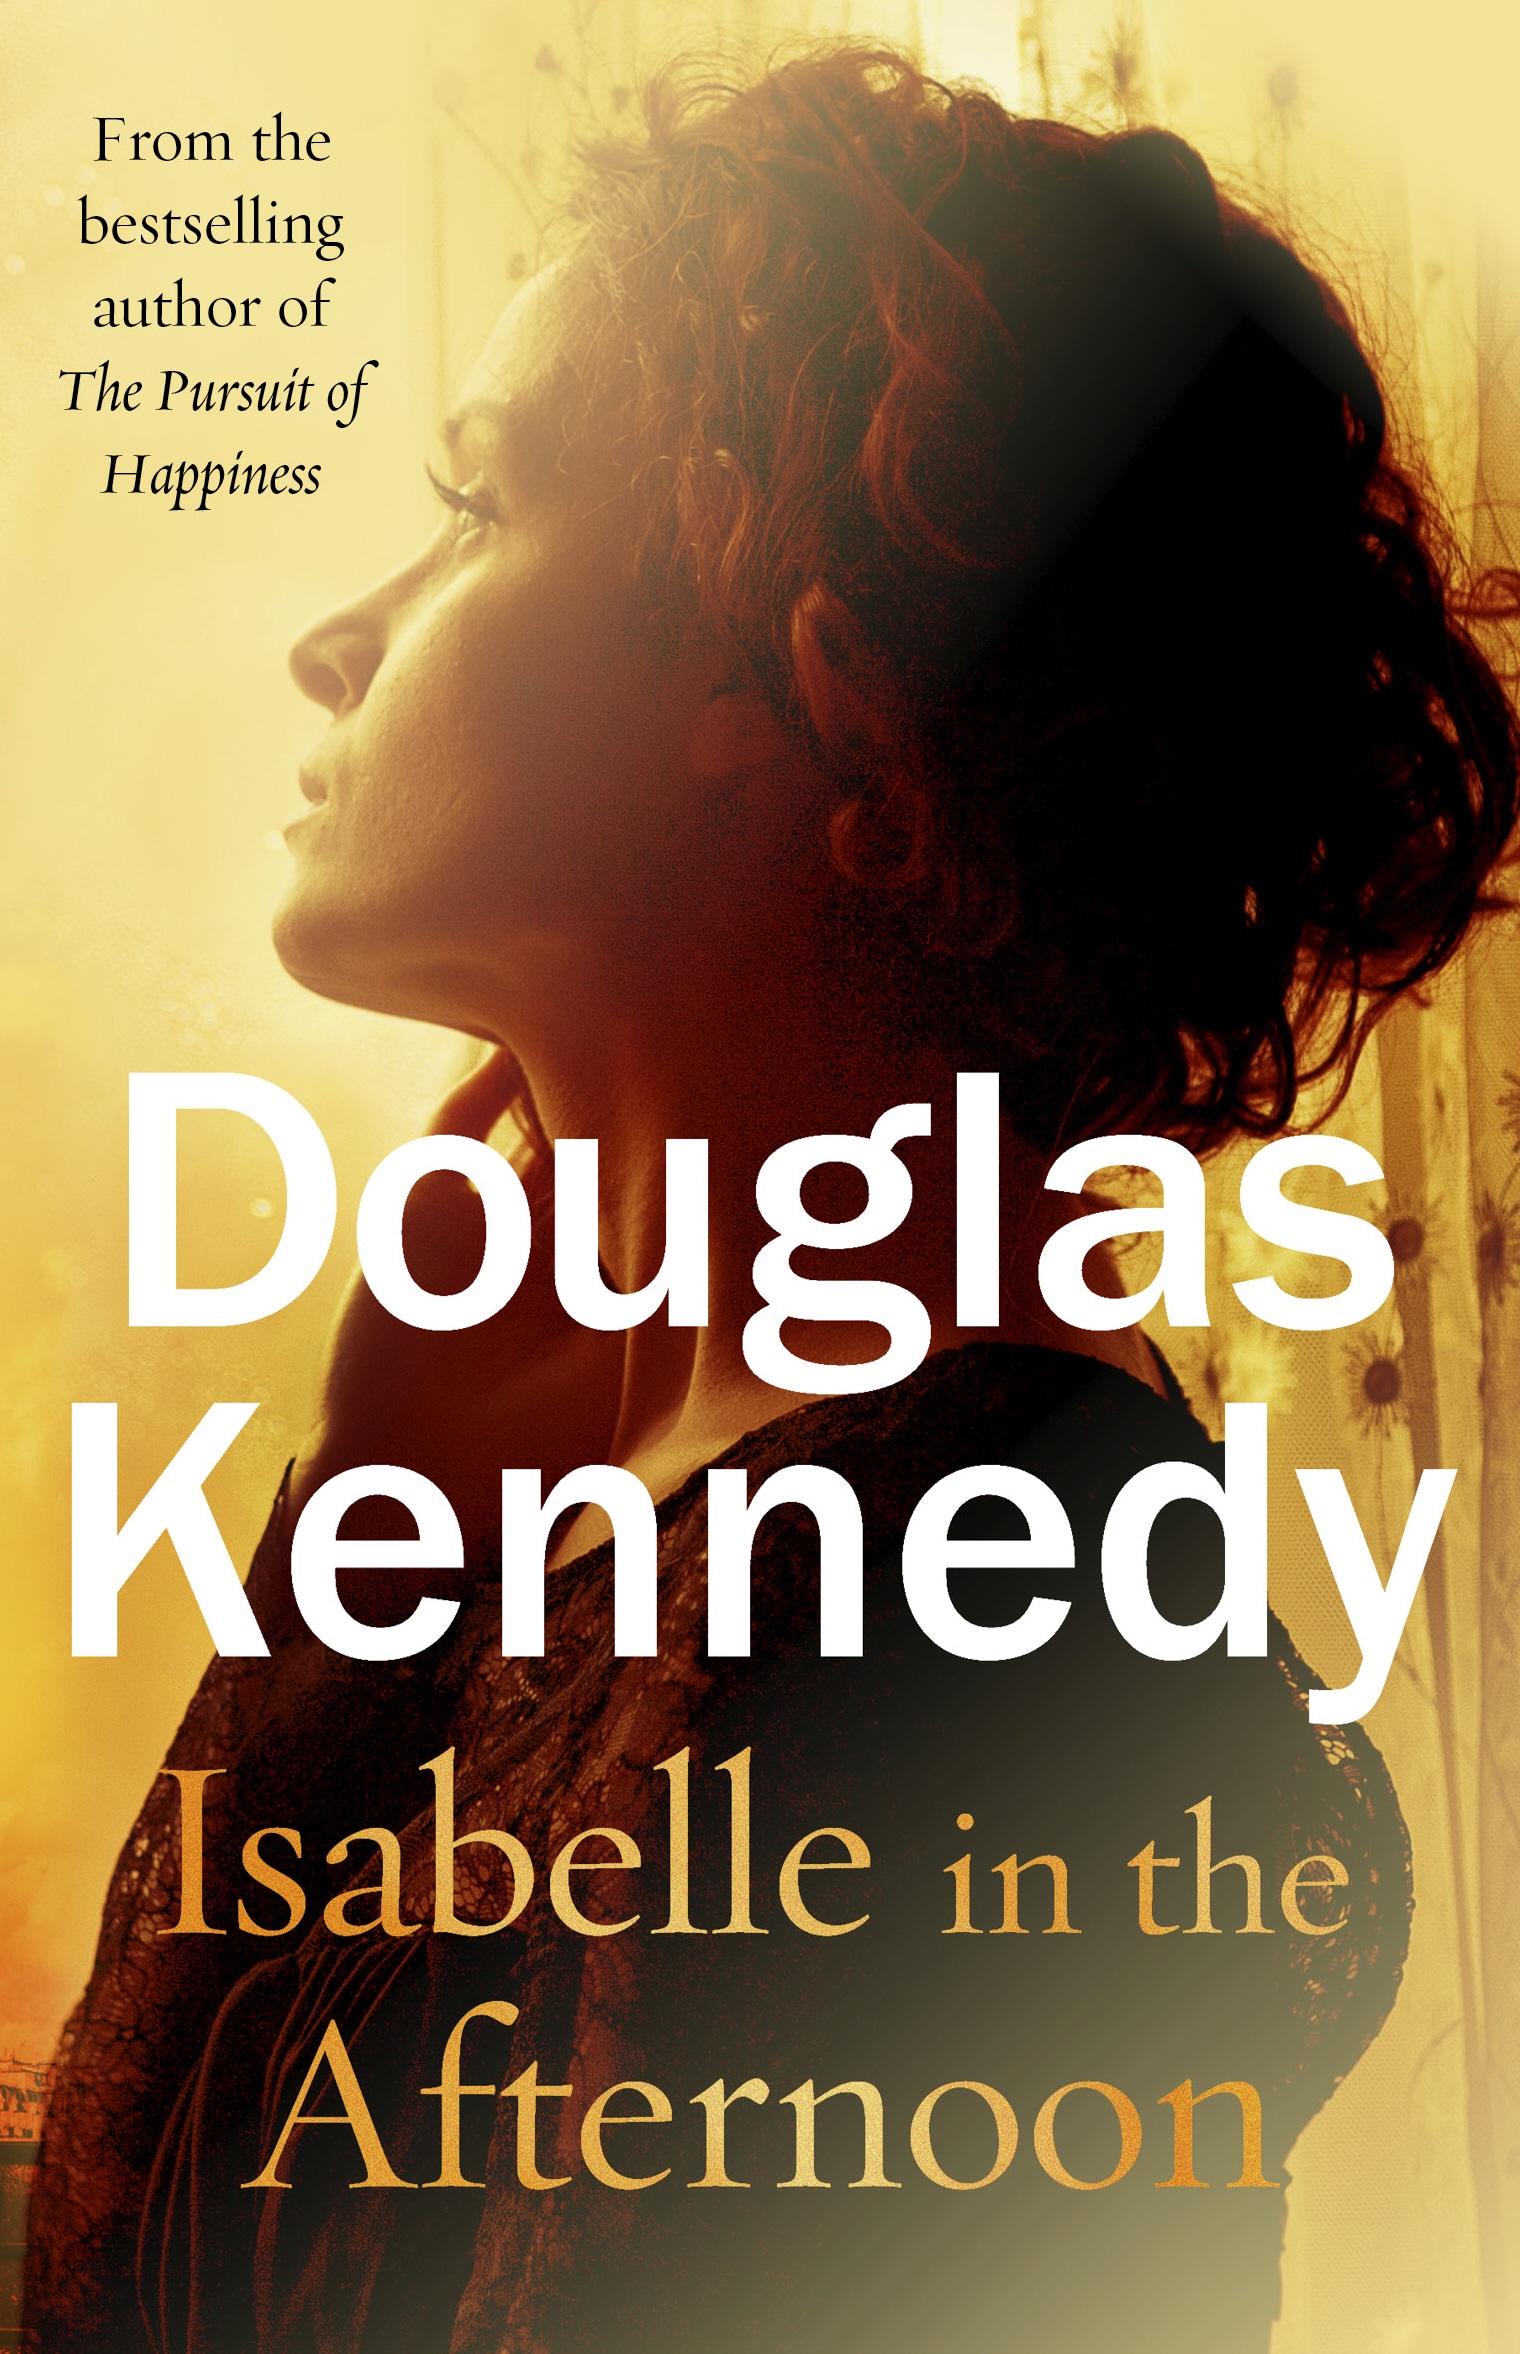 Book “Isabelle in the Afternoon” by Douglas Kennedy — August 6, 2020